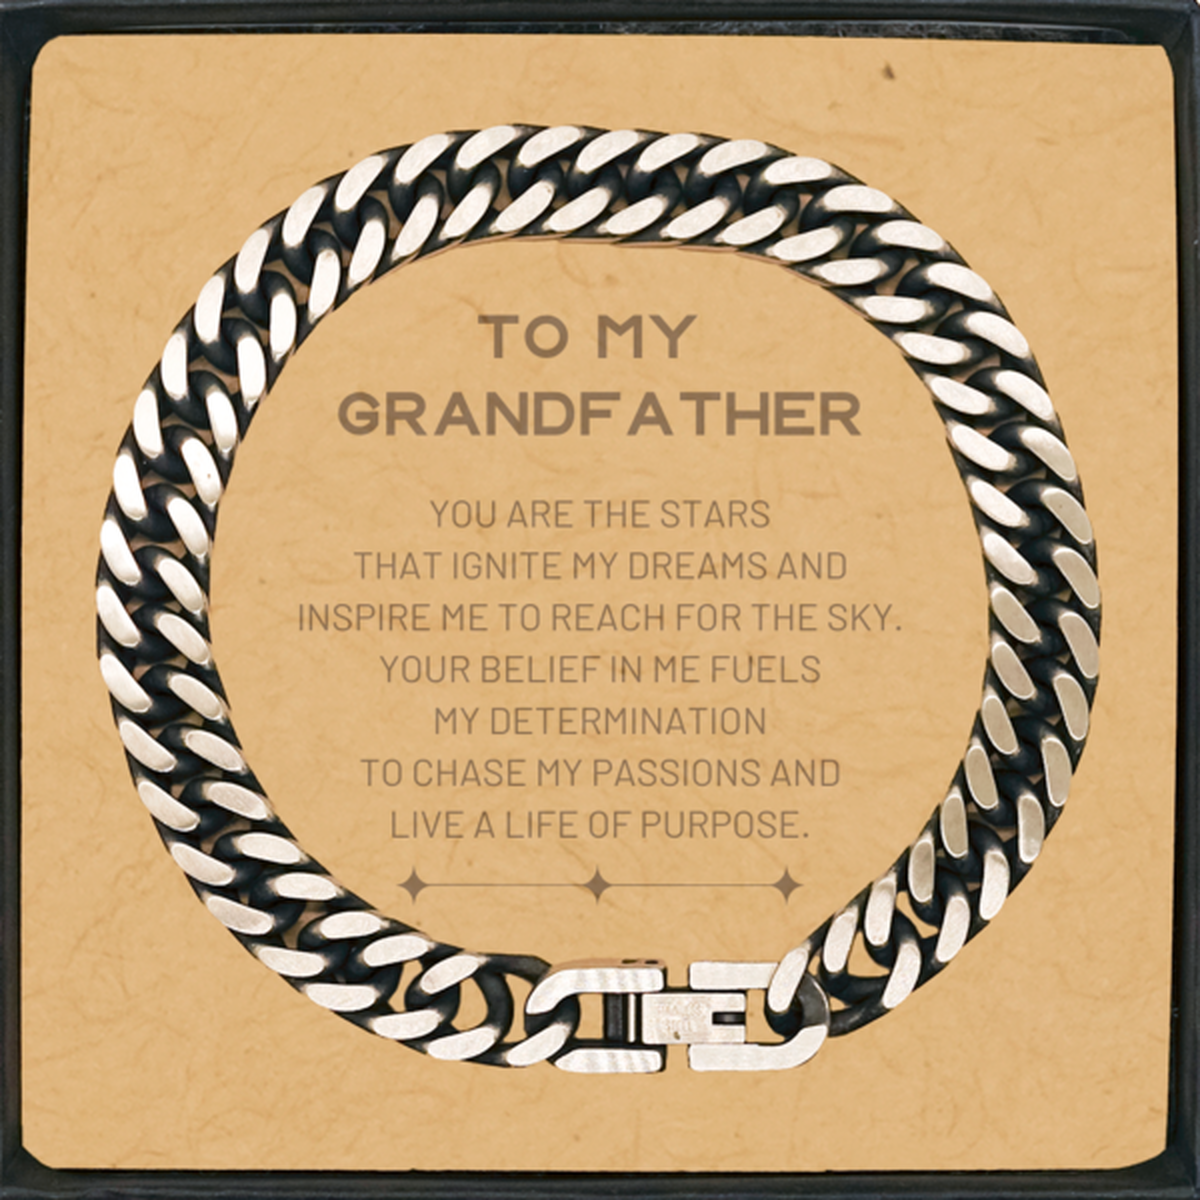 To My Grandfather Cuban Link Chain Bracelet, You are the stars that ignite my dreams and inspire me to reach for the sky, Birthday Unique Gifts For Grandfather, Thank You Gifts For Grandfather